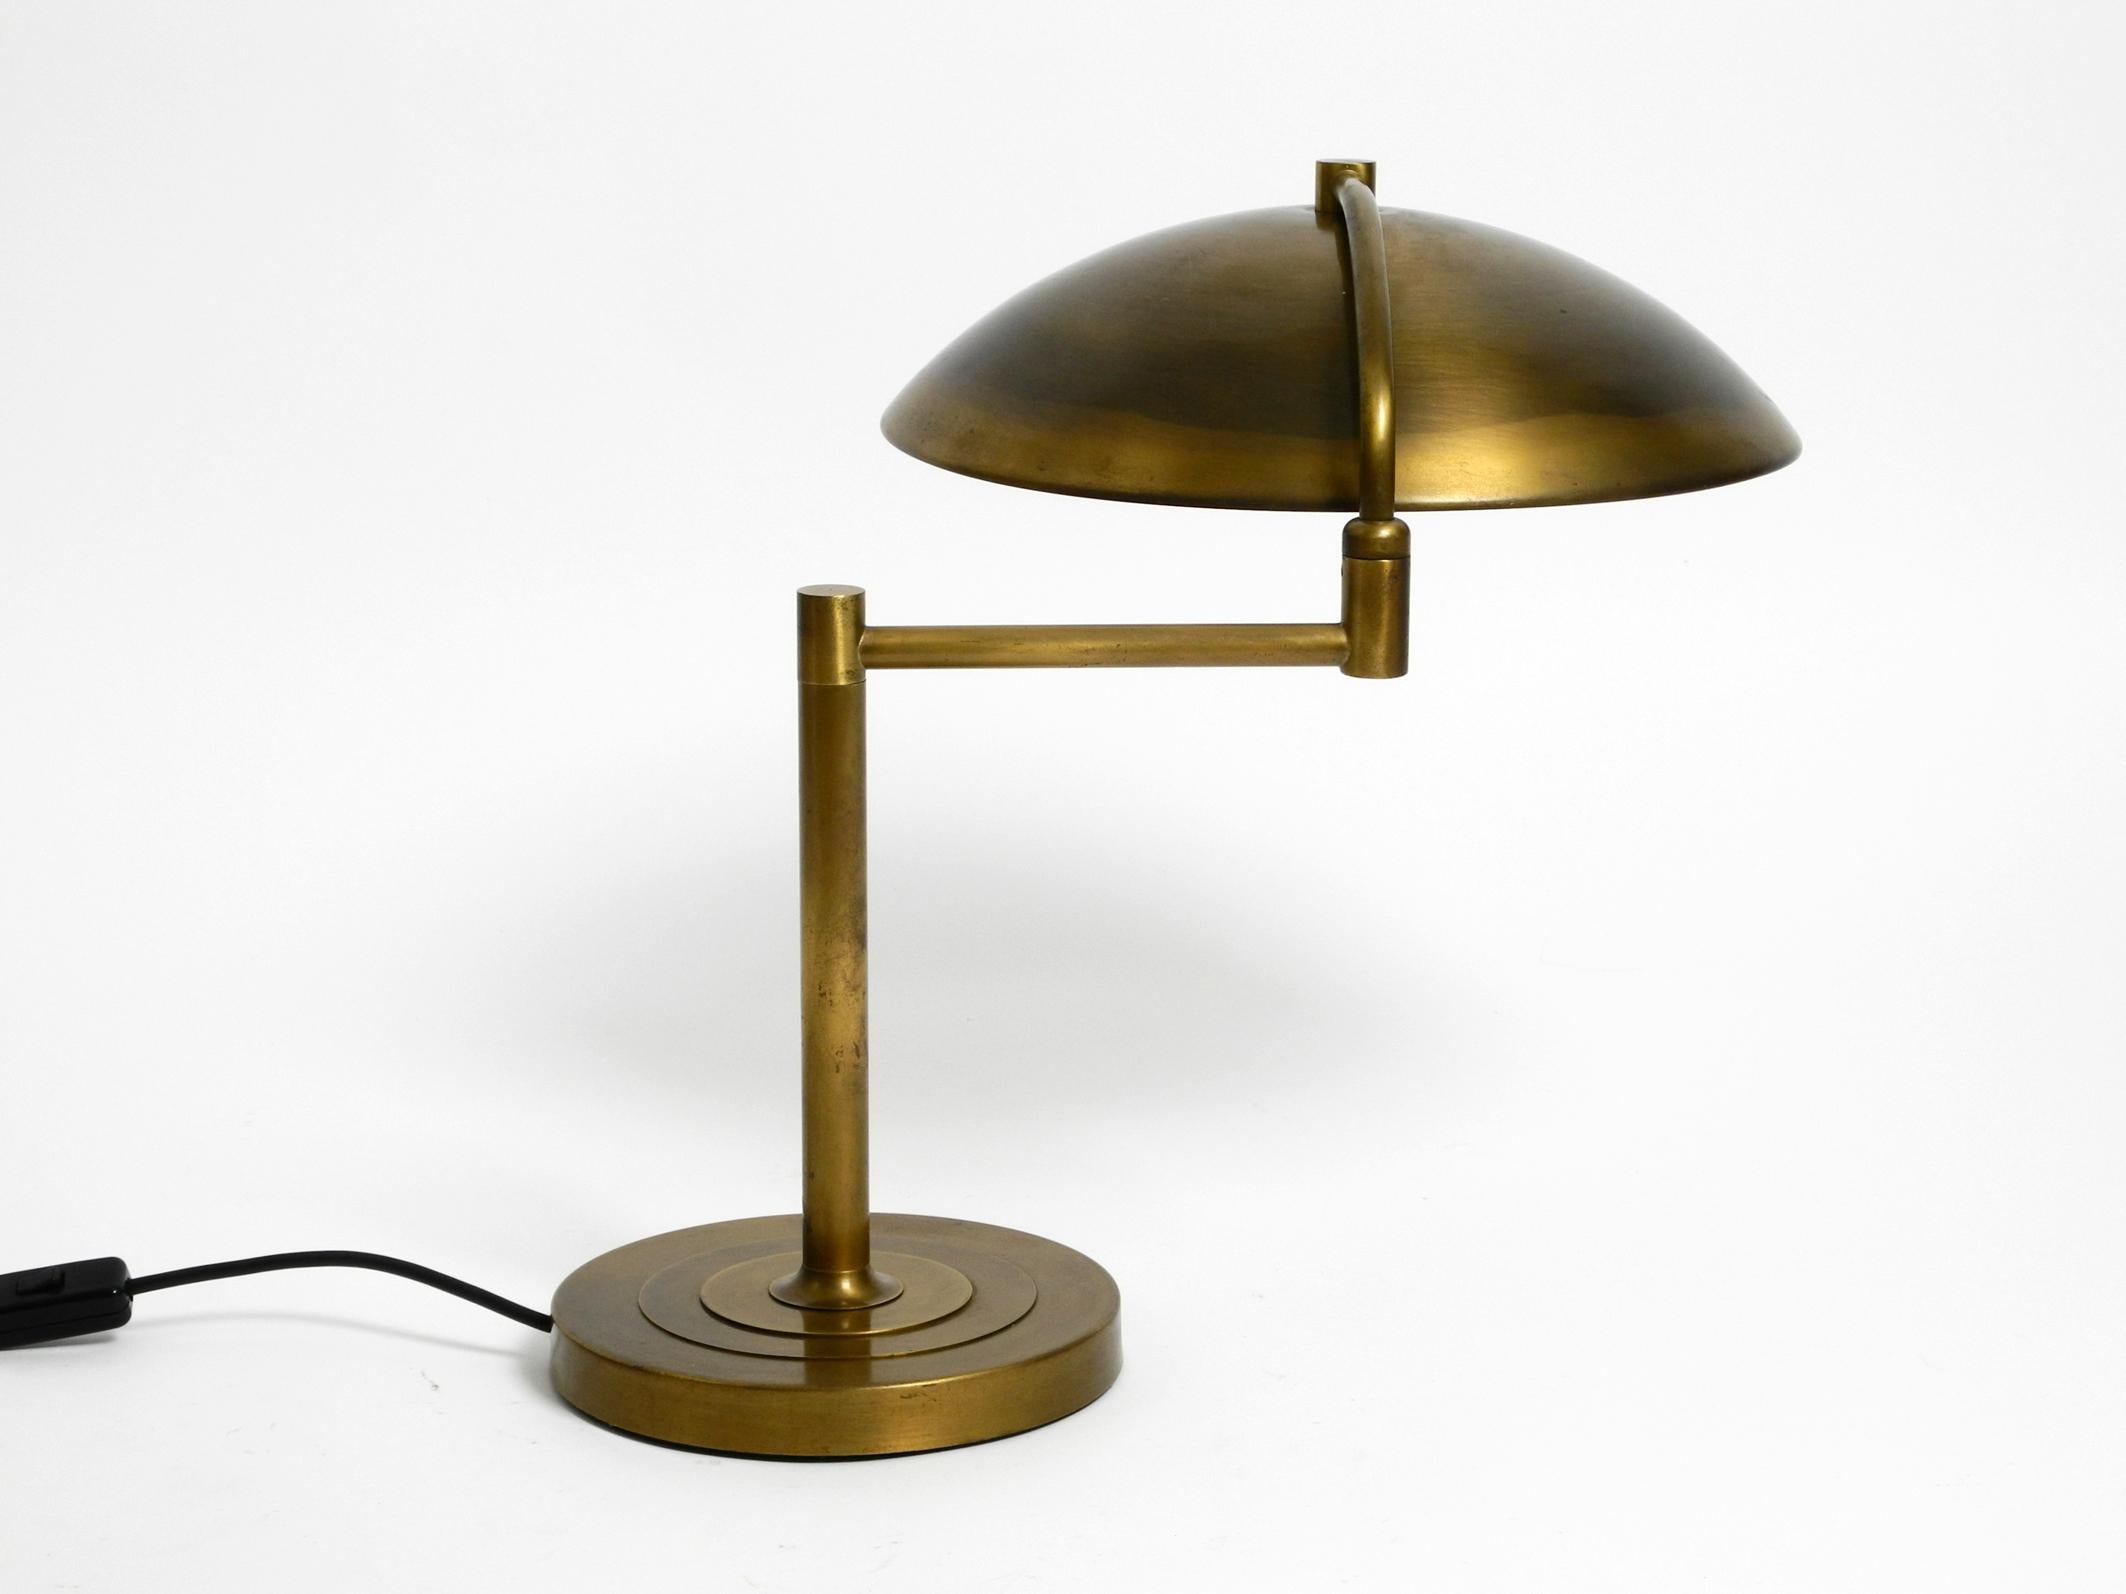 Beautiful large heavy Mid Century Modern brass table lamp with swivel joint.
Great minimalist elegant design. Made in Germany.
In very good condition with very few signs of wear.
Lamp is made entirely of brass. Has something of an Art Deco